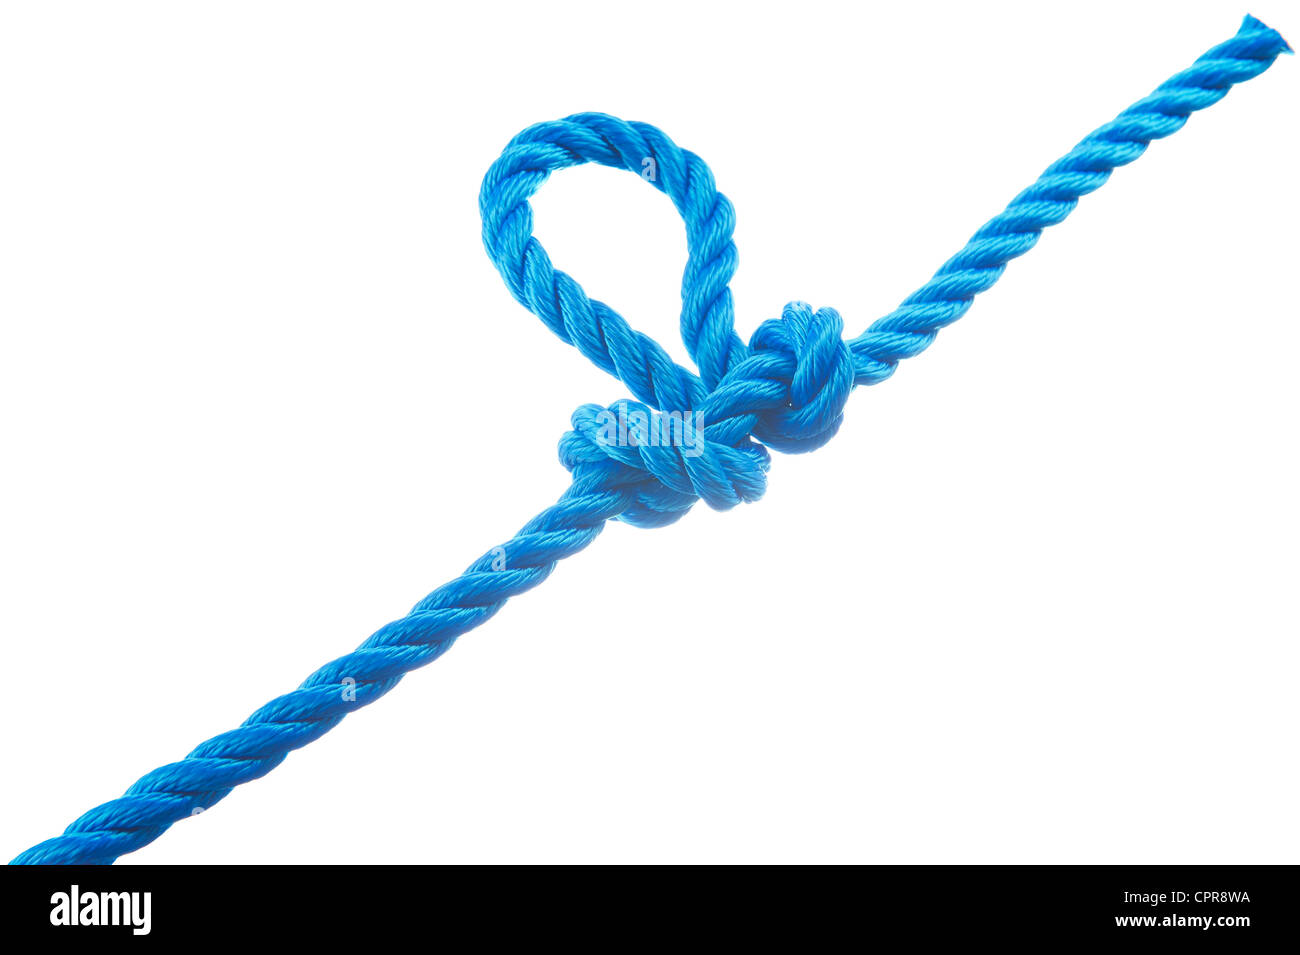 Manharness knot isolated on white background Stock Photo